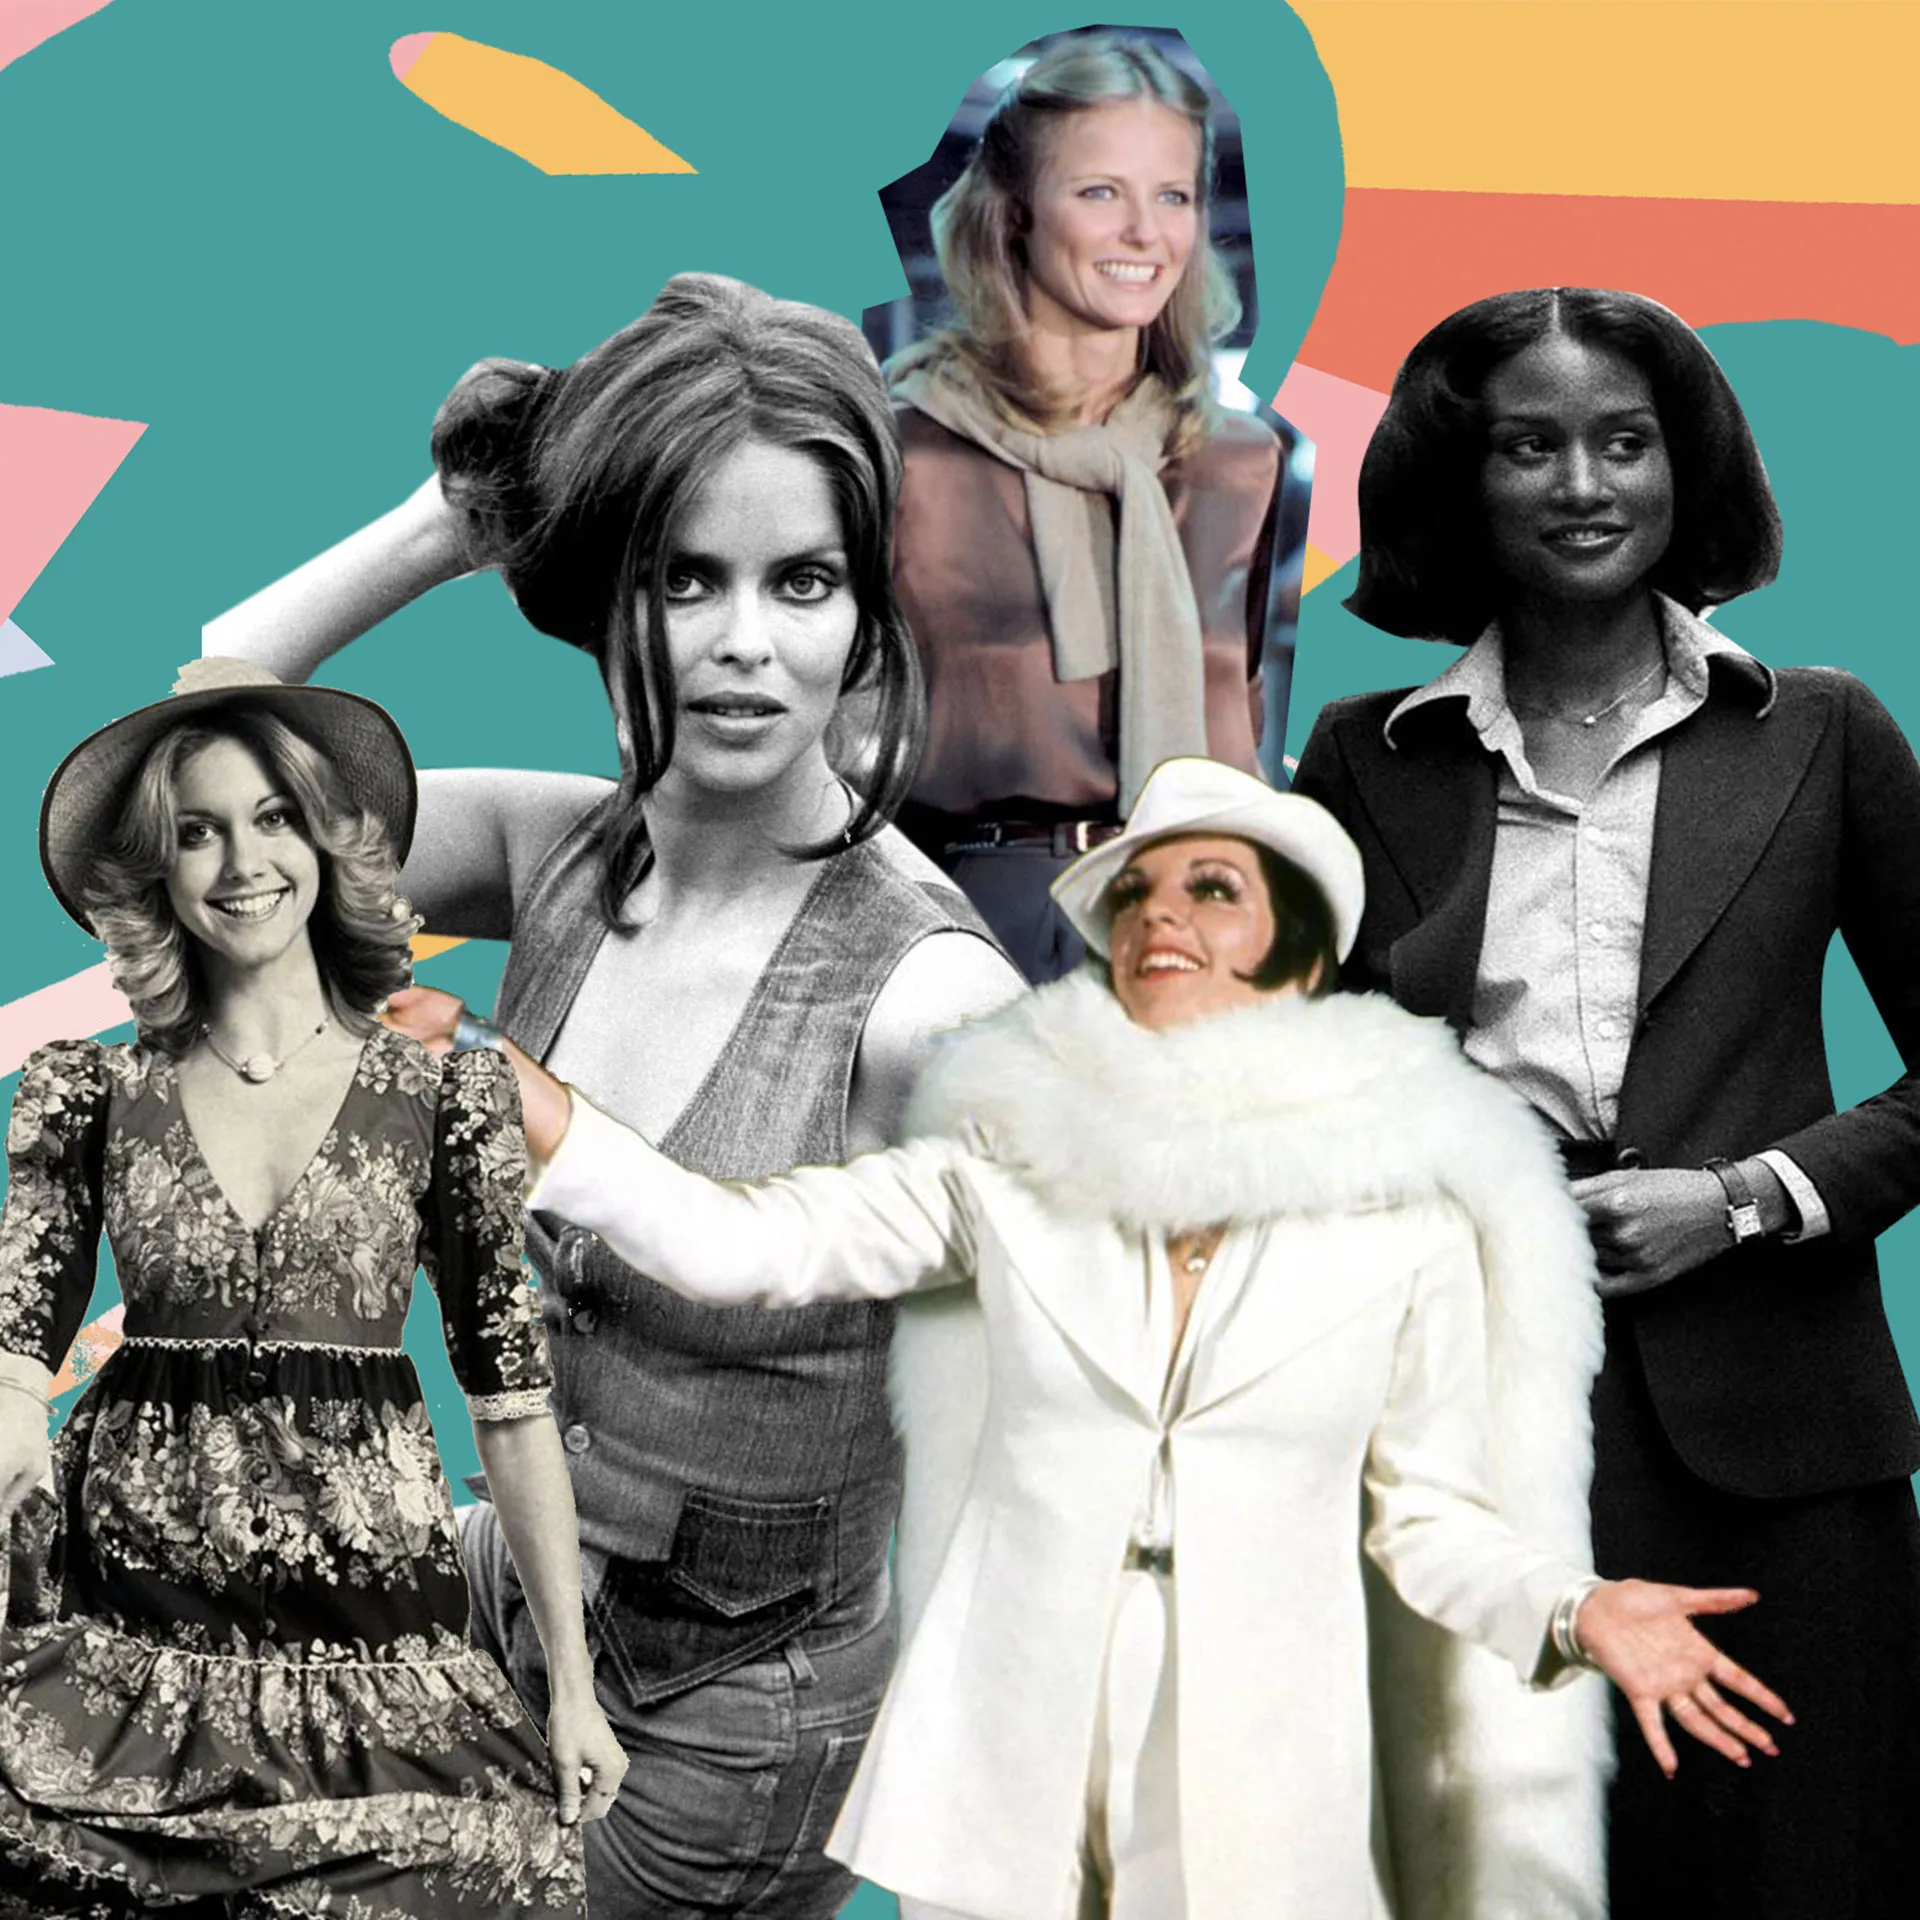 A trip Through Iconic Fashion Styles: From60’s Hippie to Studio 54 Glam